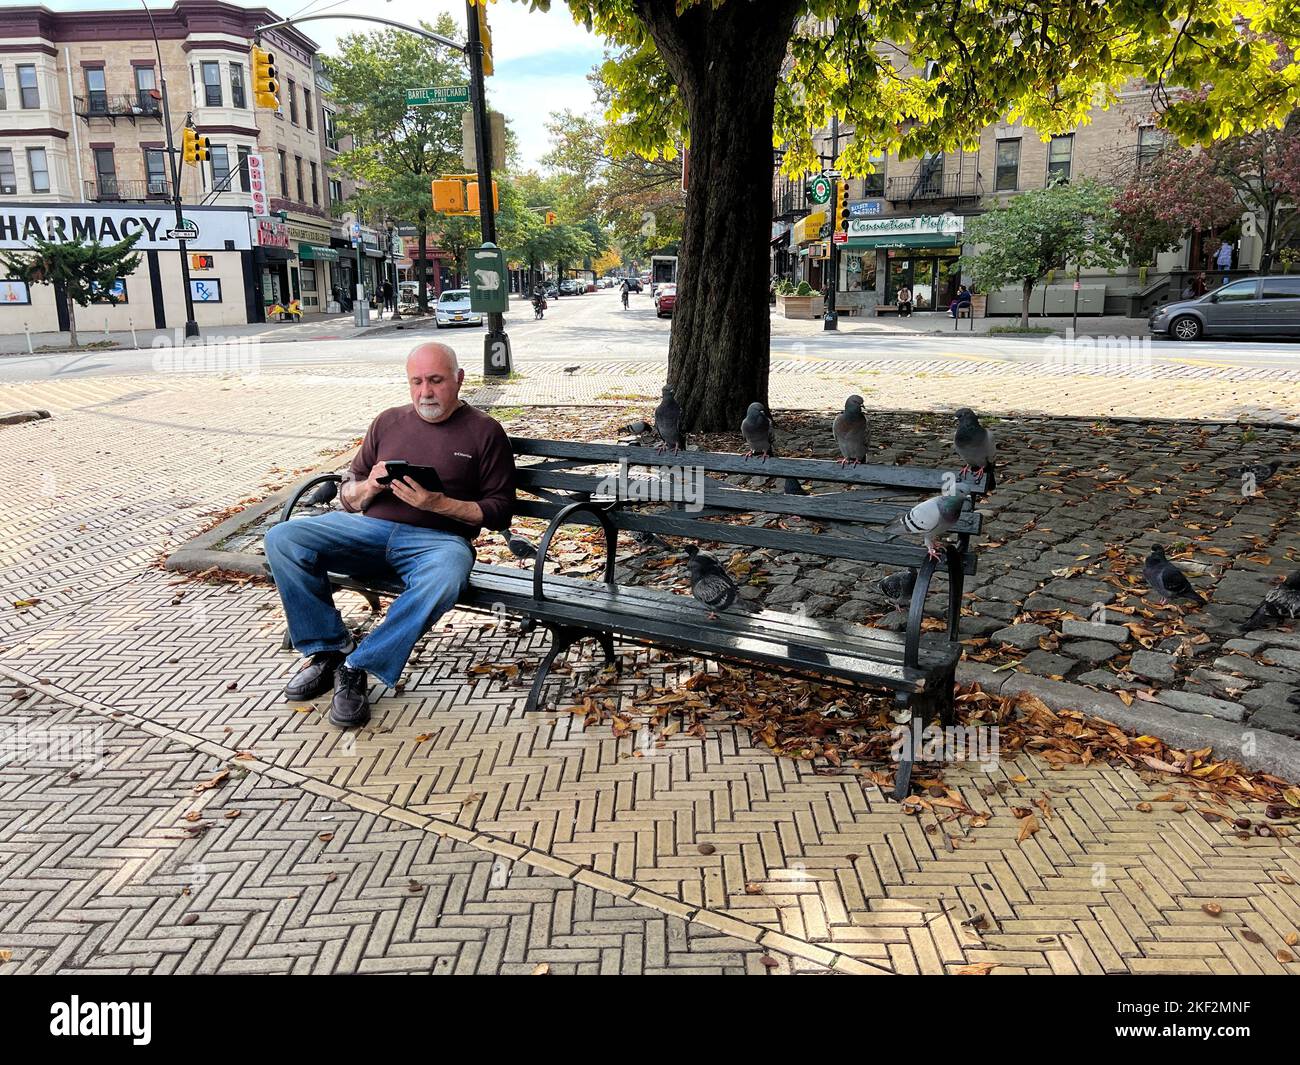 Man shares a bench with pigeons in Prichard Square by Prospect Park along Prospect Park West in Brooklyn, New York. Stock Photo